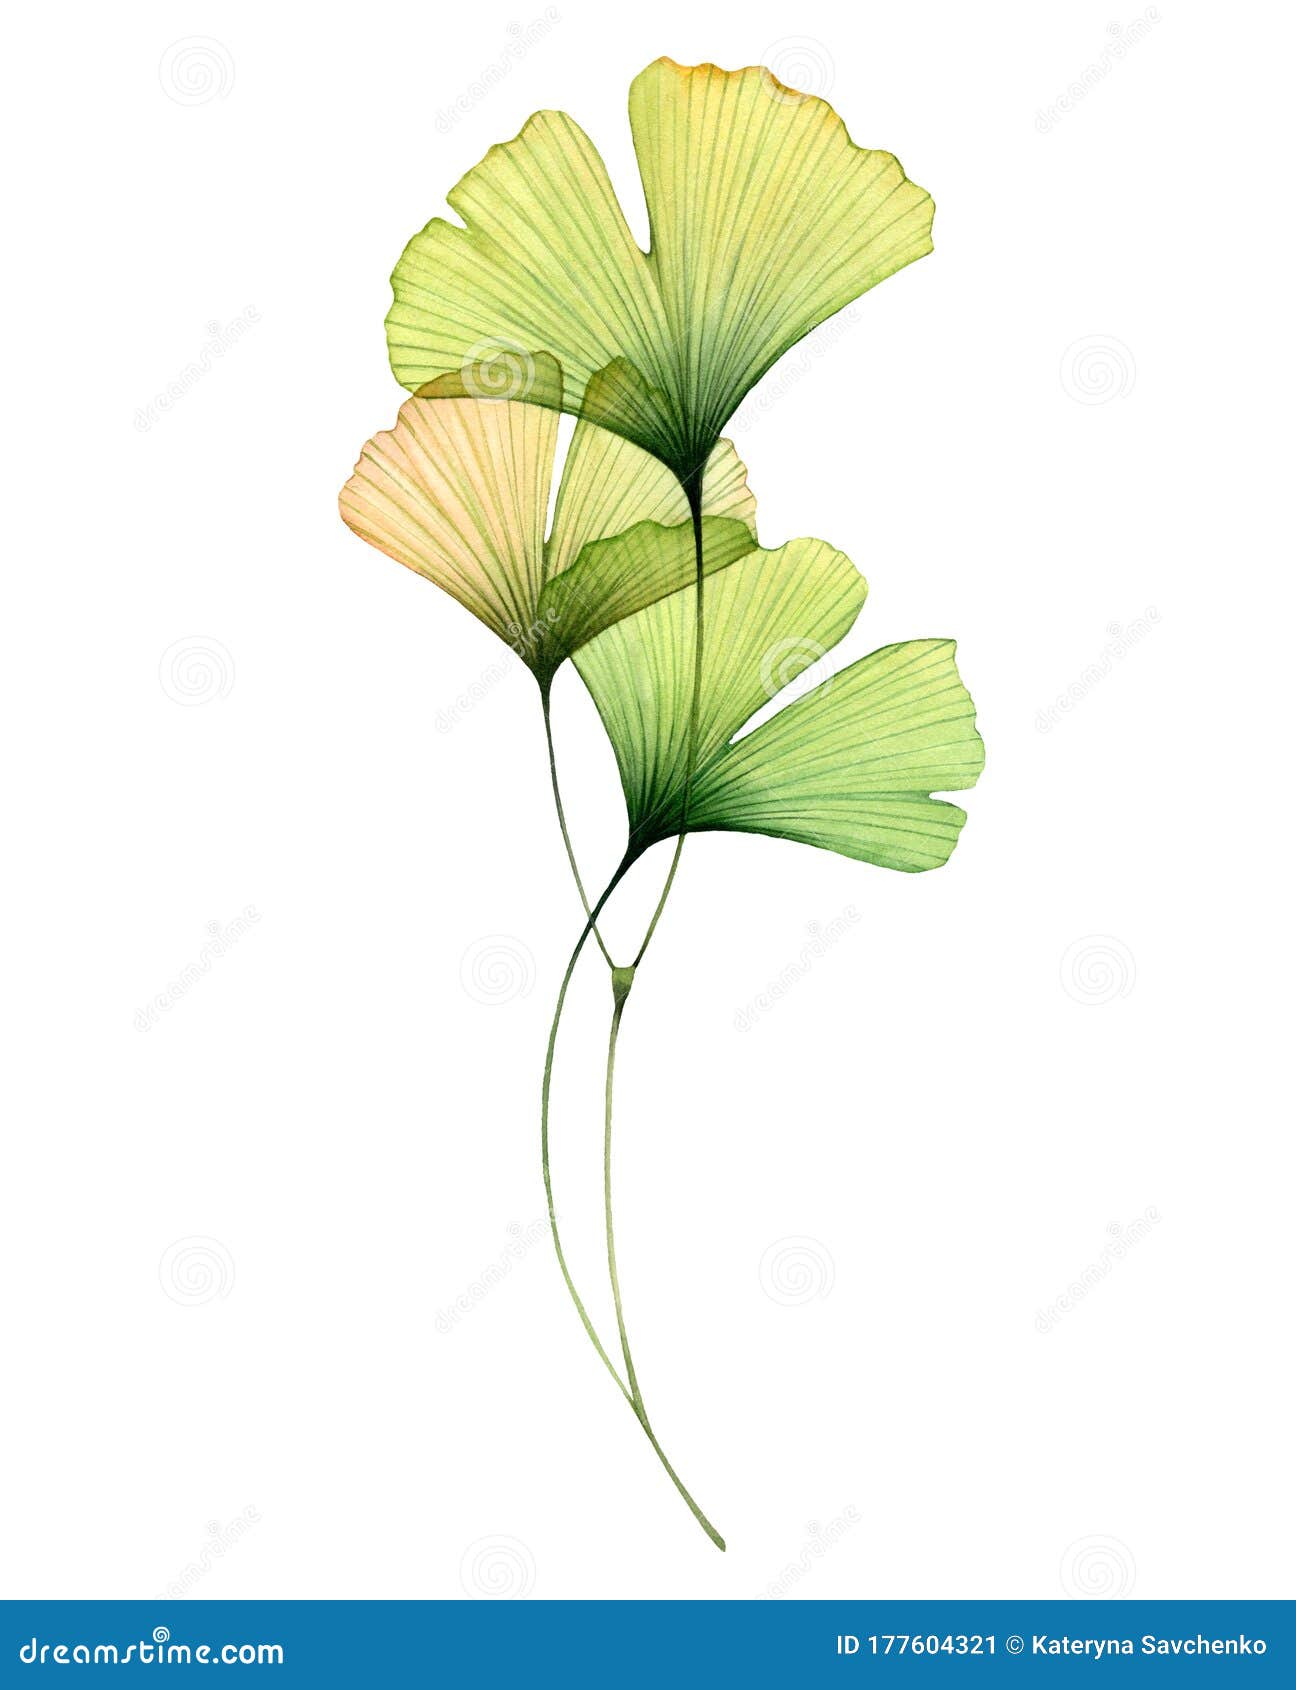 Ginko Biloba Drawn Stock Photos and Pictures - 2,085 Images | Shutterstock